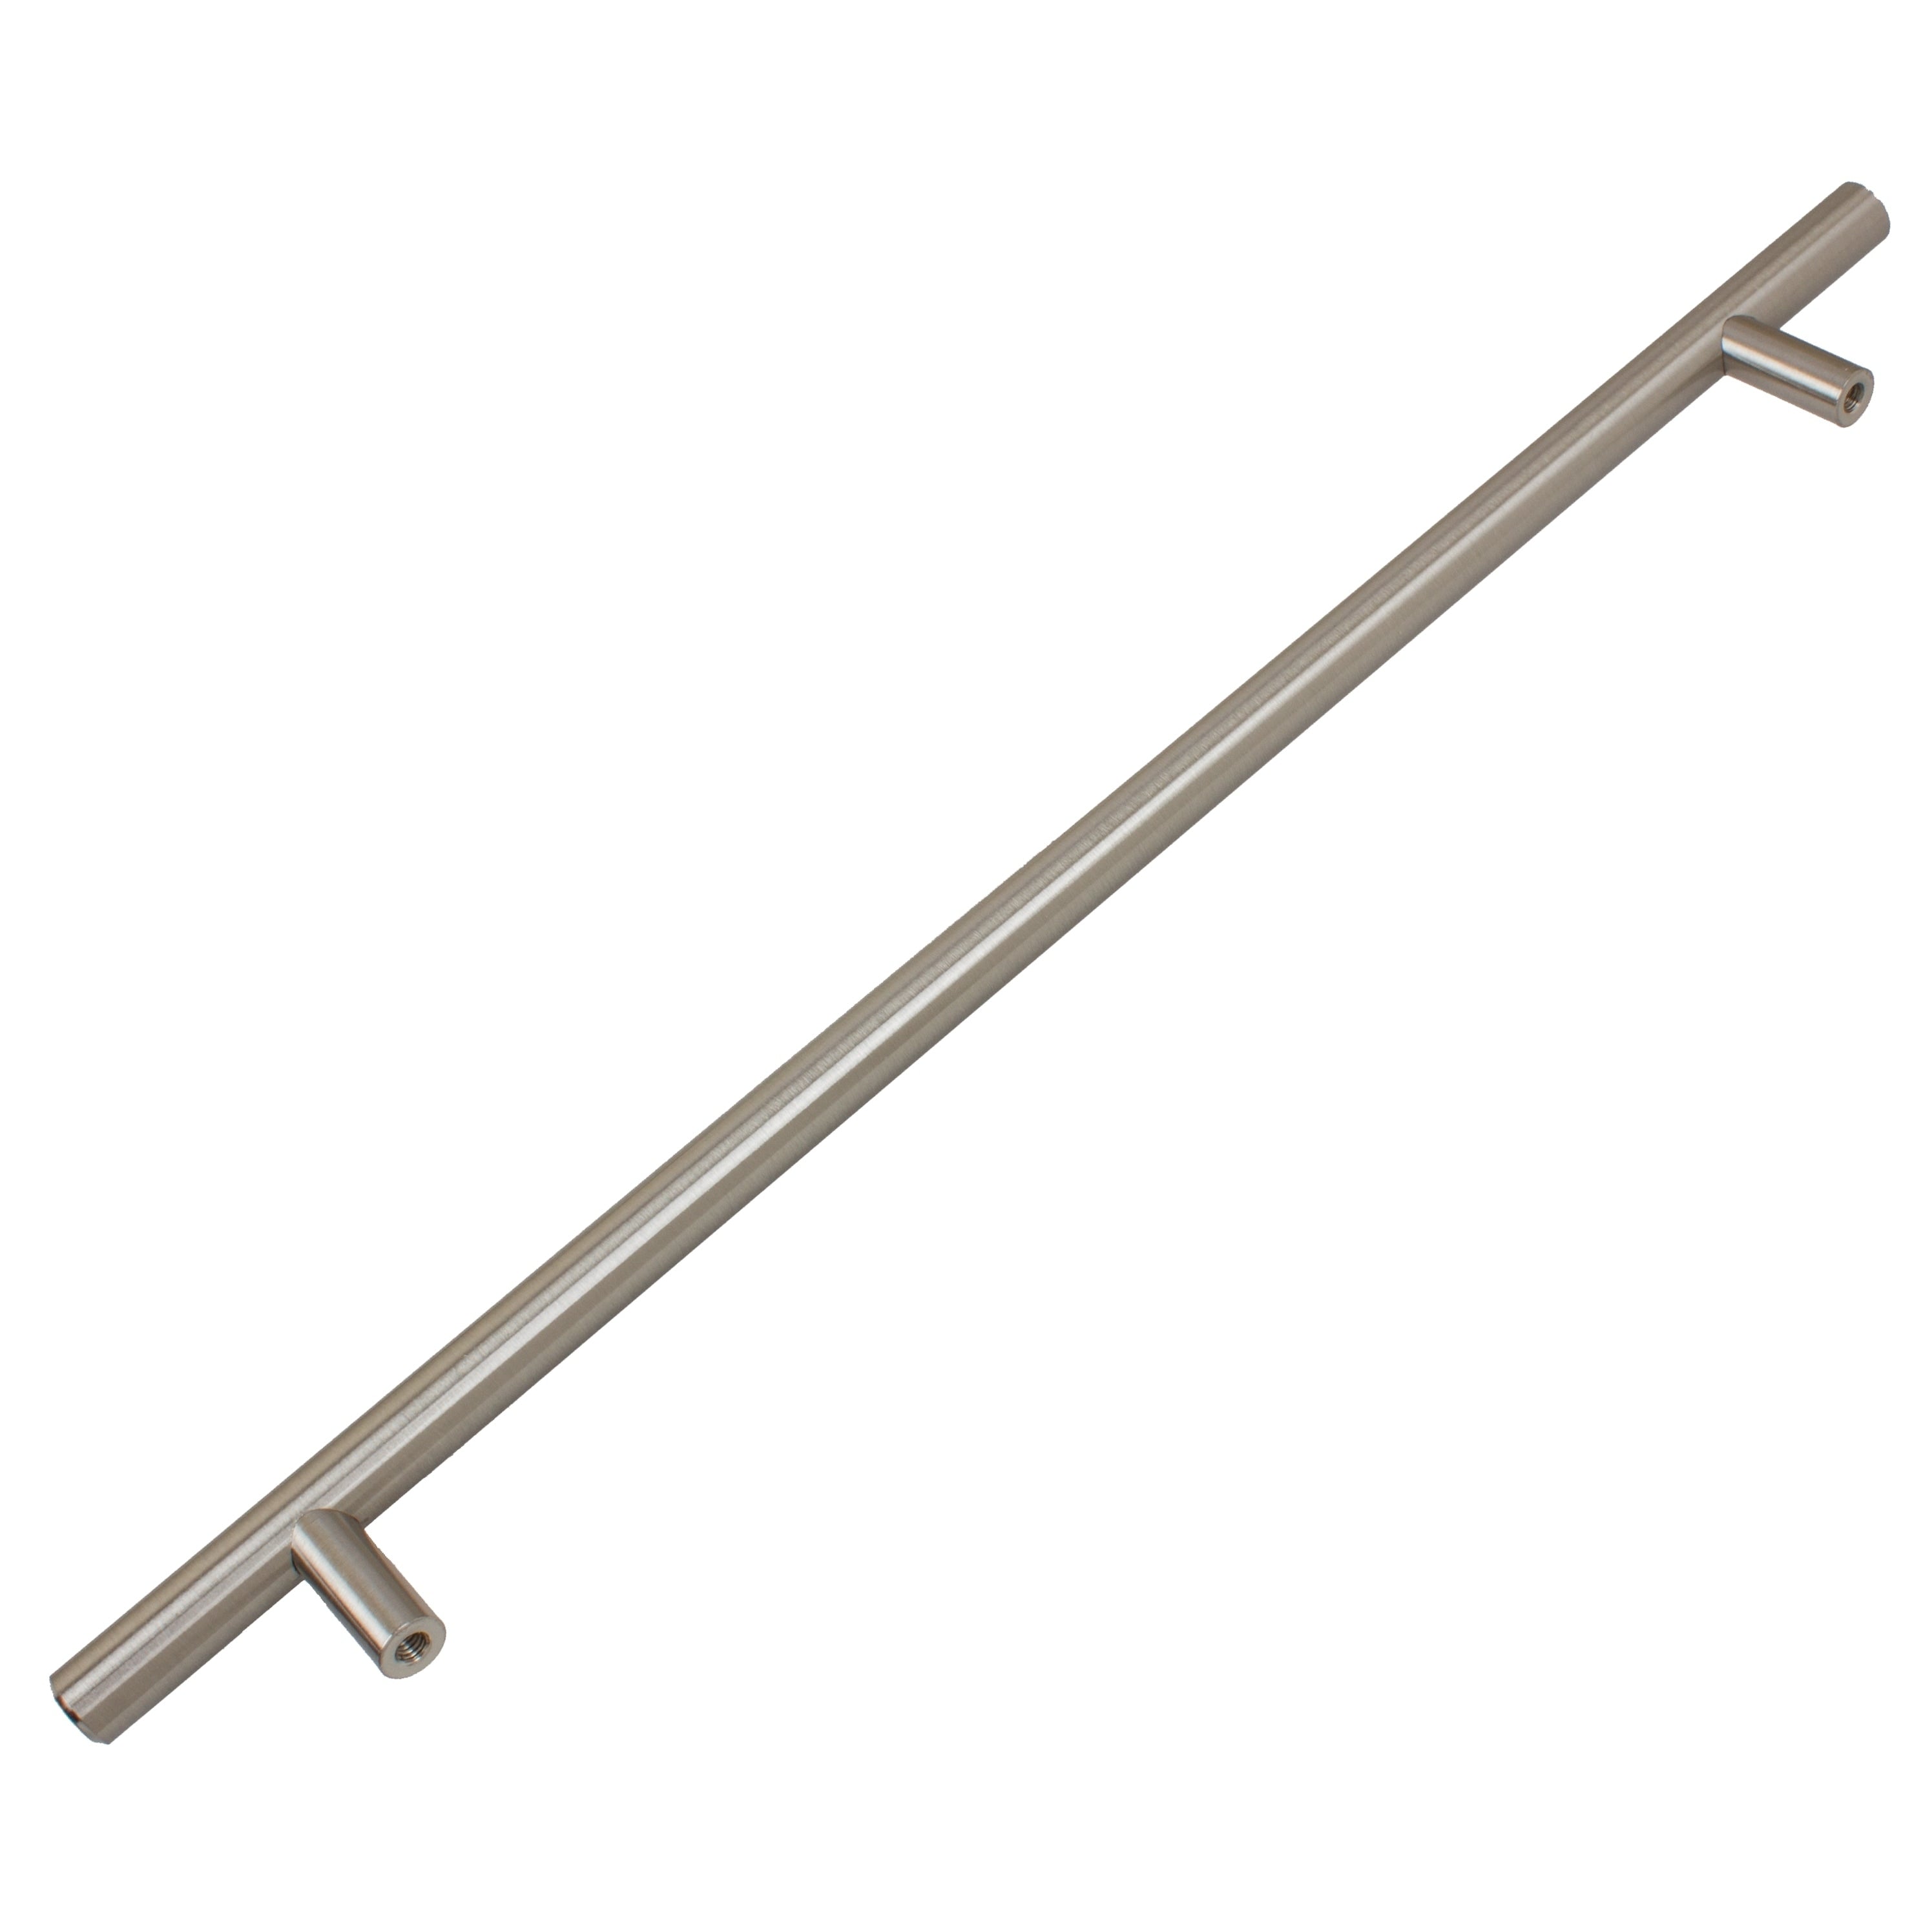 14-inch Stainless Steel Cabinet Bar Pulls (Pack Of 25) Grey Nickel Finish